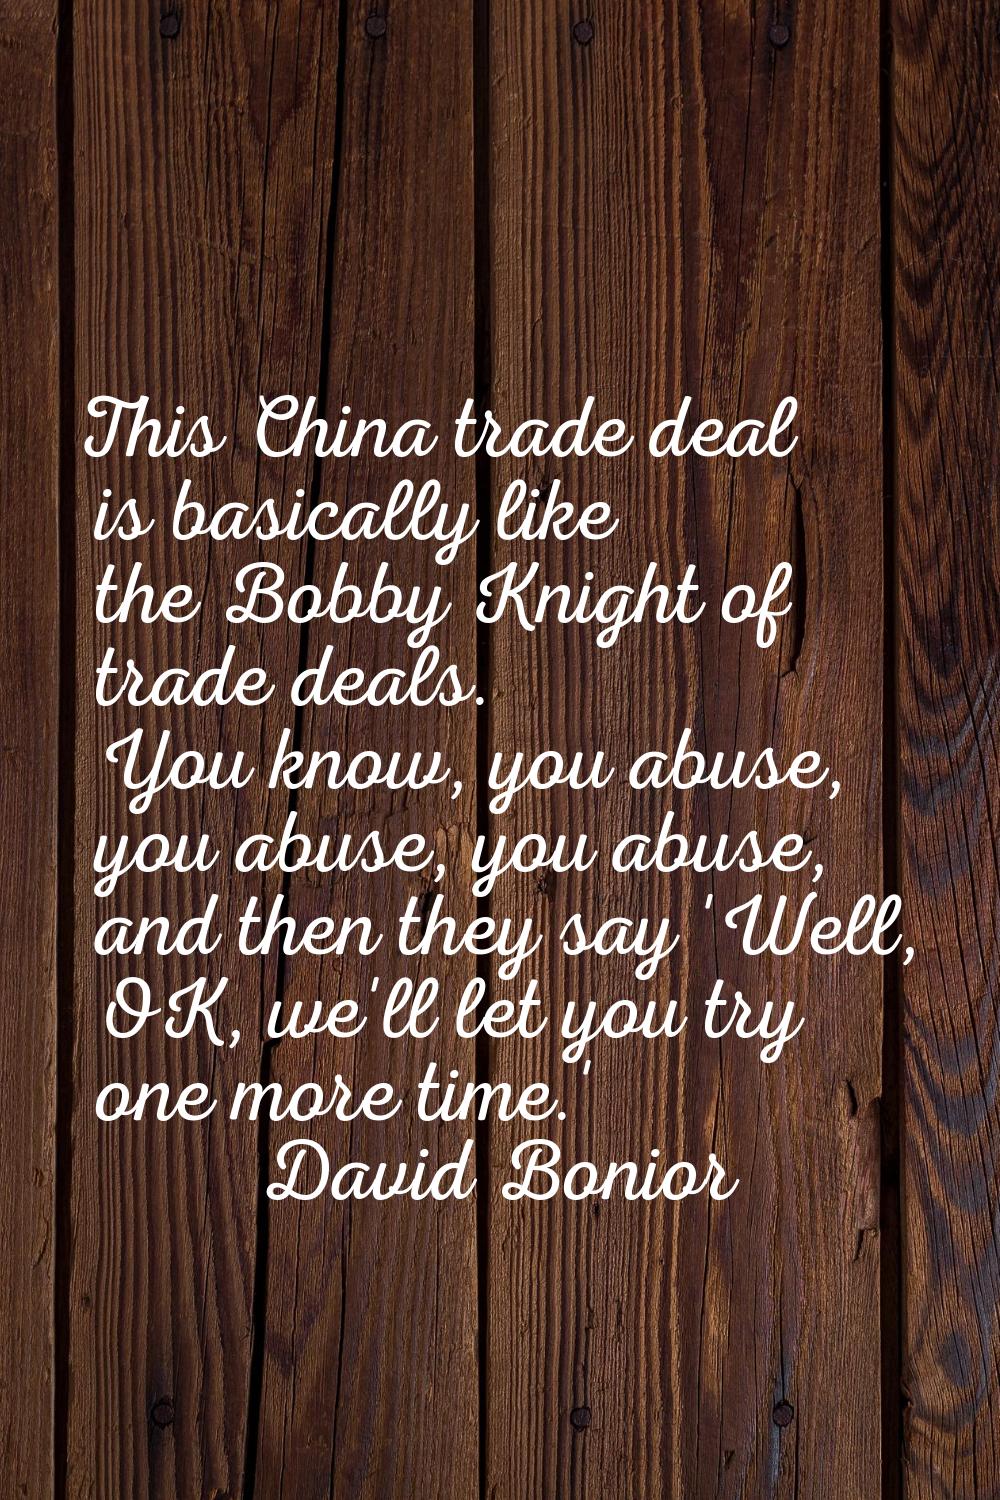 This China trade deal is basically like the Bobby Knight of trade deals. You know, you abuse, you a